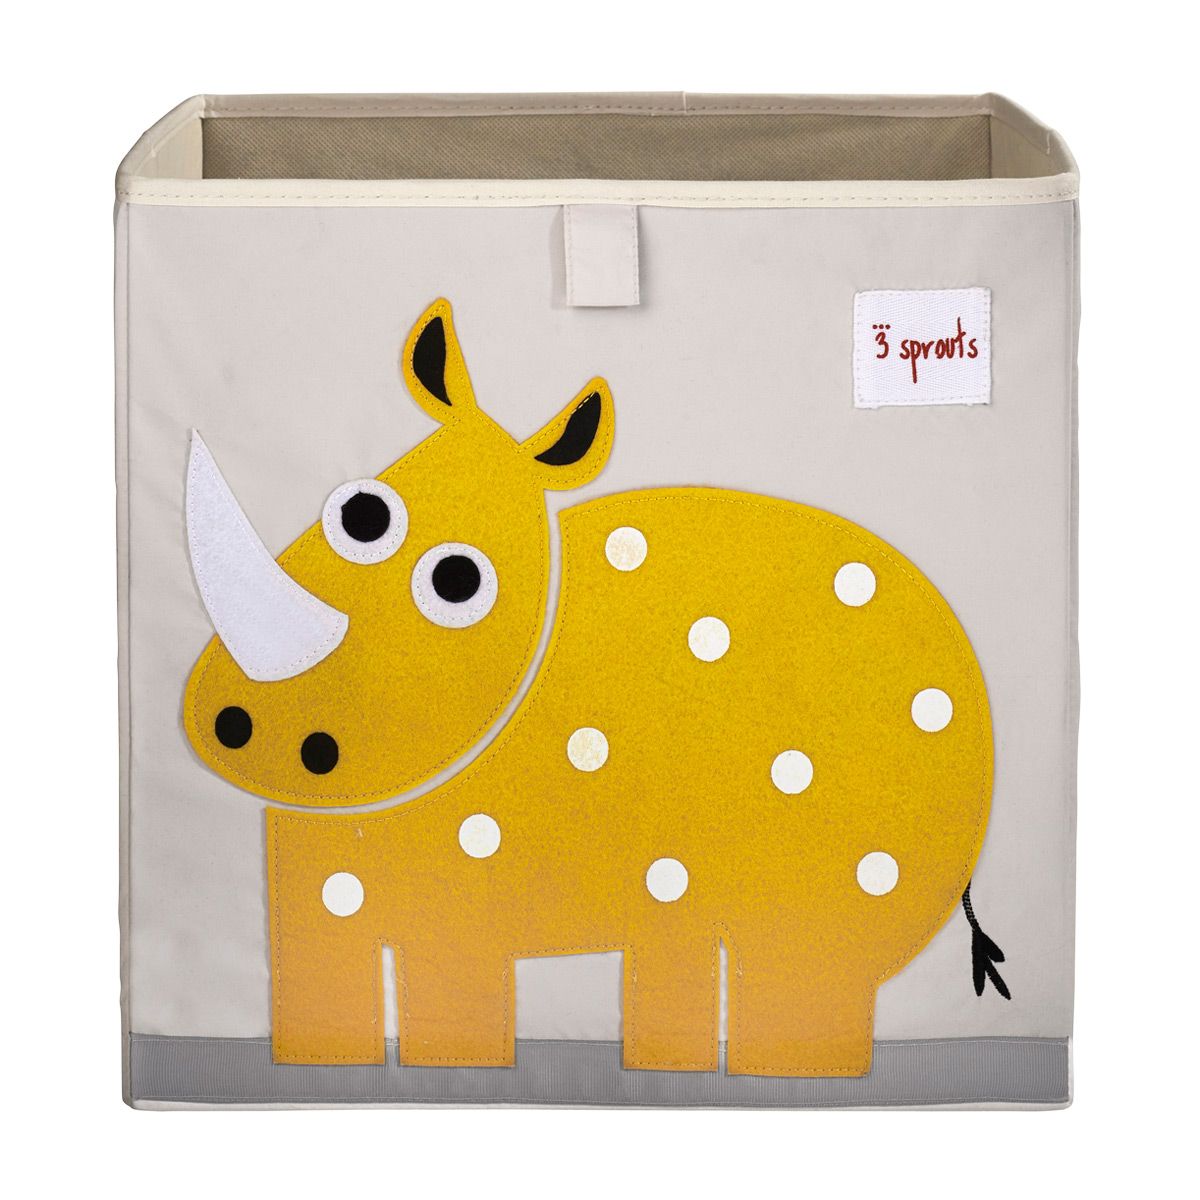 Rhino Toy Storage Cube | The Container Store